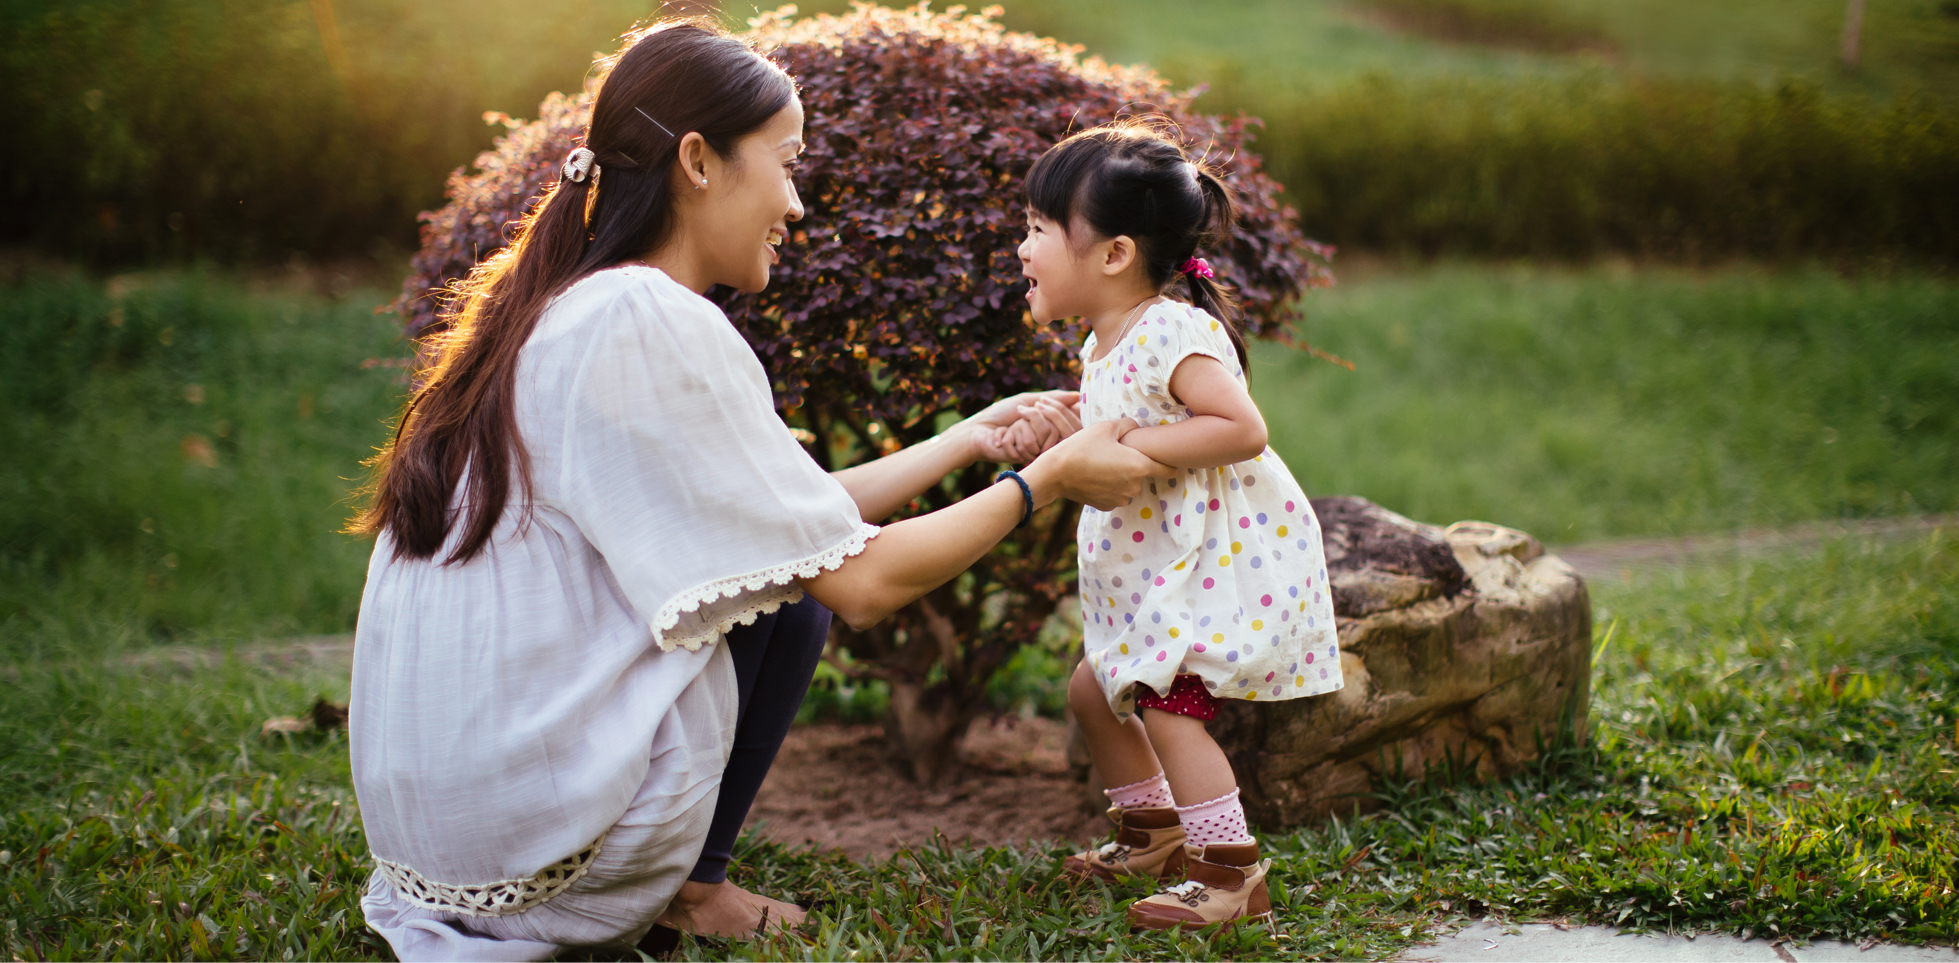 A mother and young child holding hands in the garden